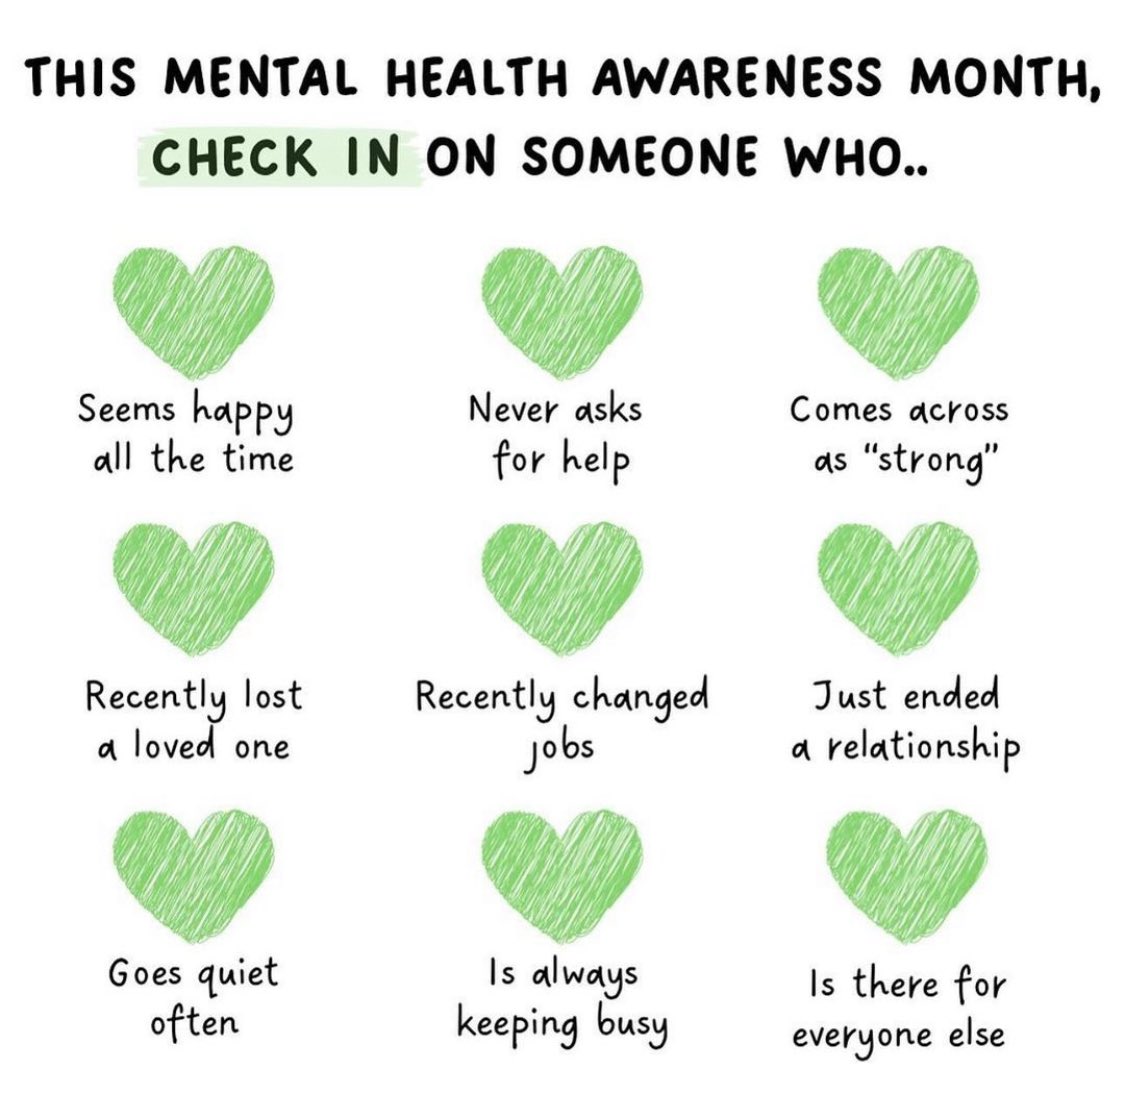 💚Check on each other 💚#weareallinthistogether #MentalHealthMatters